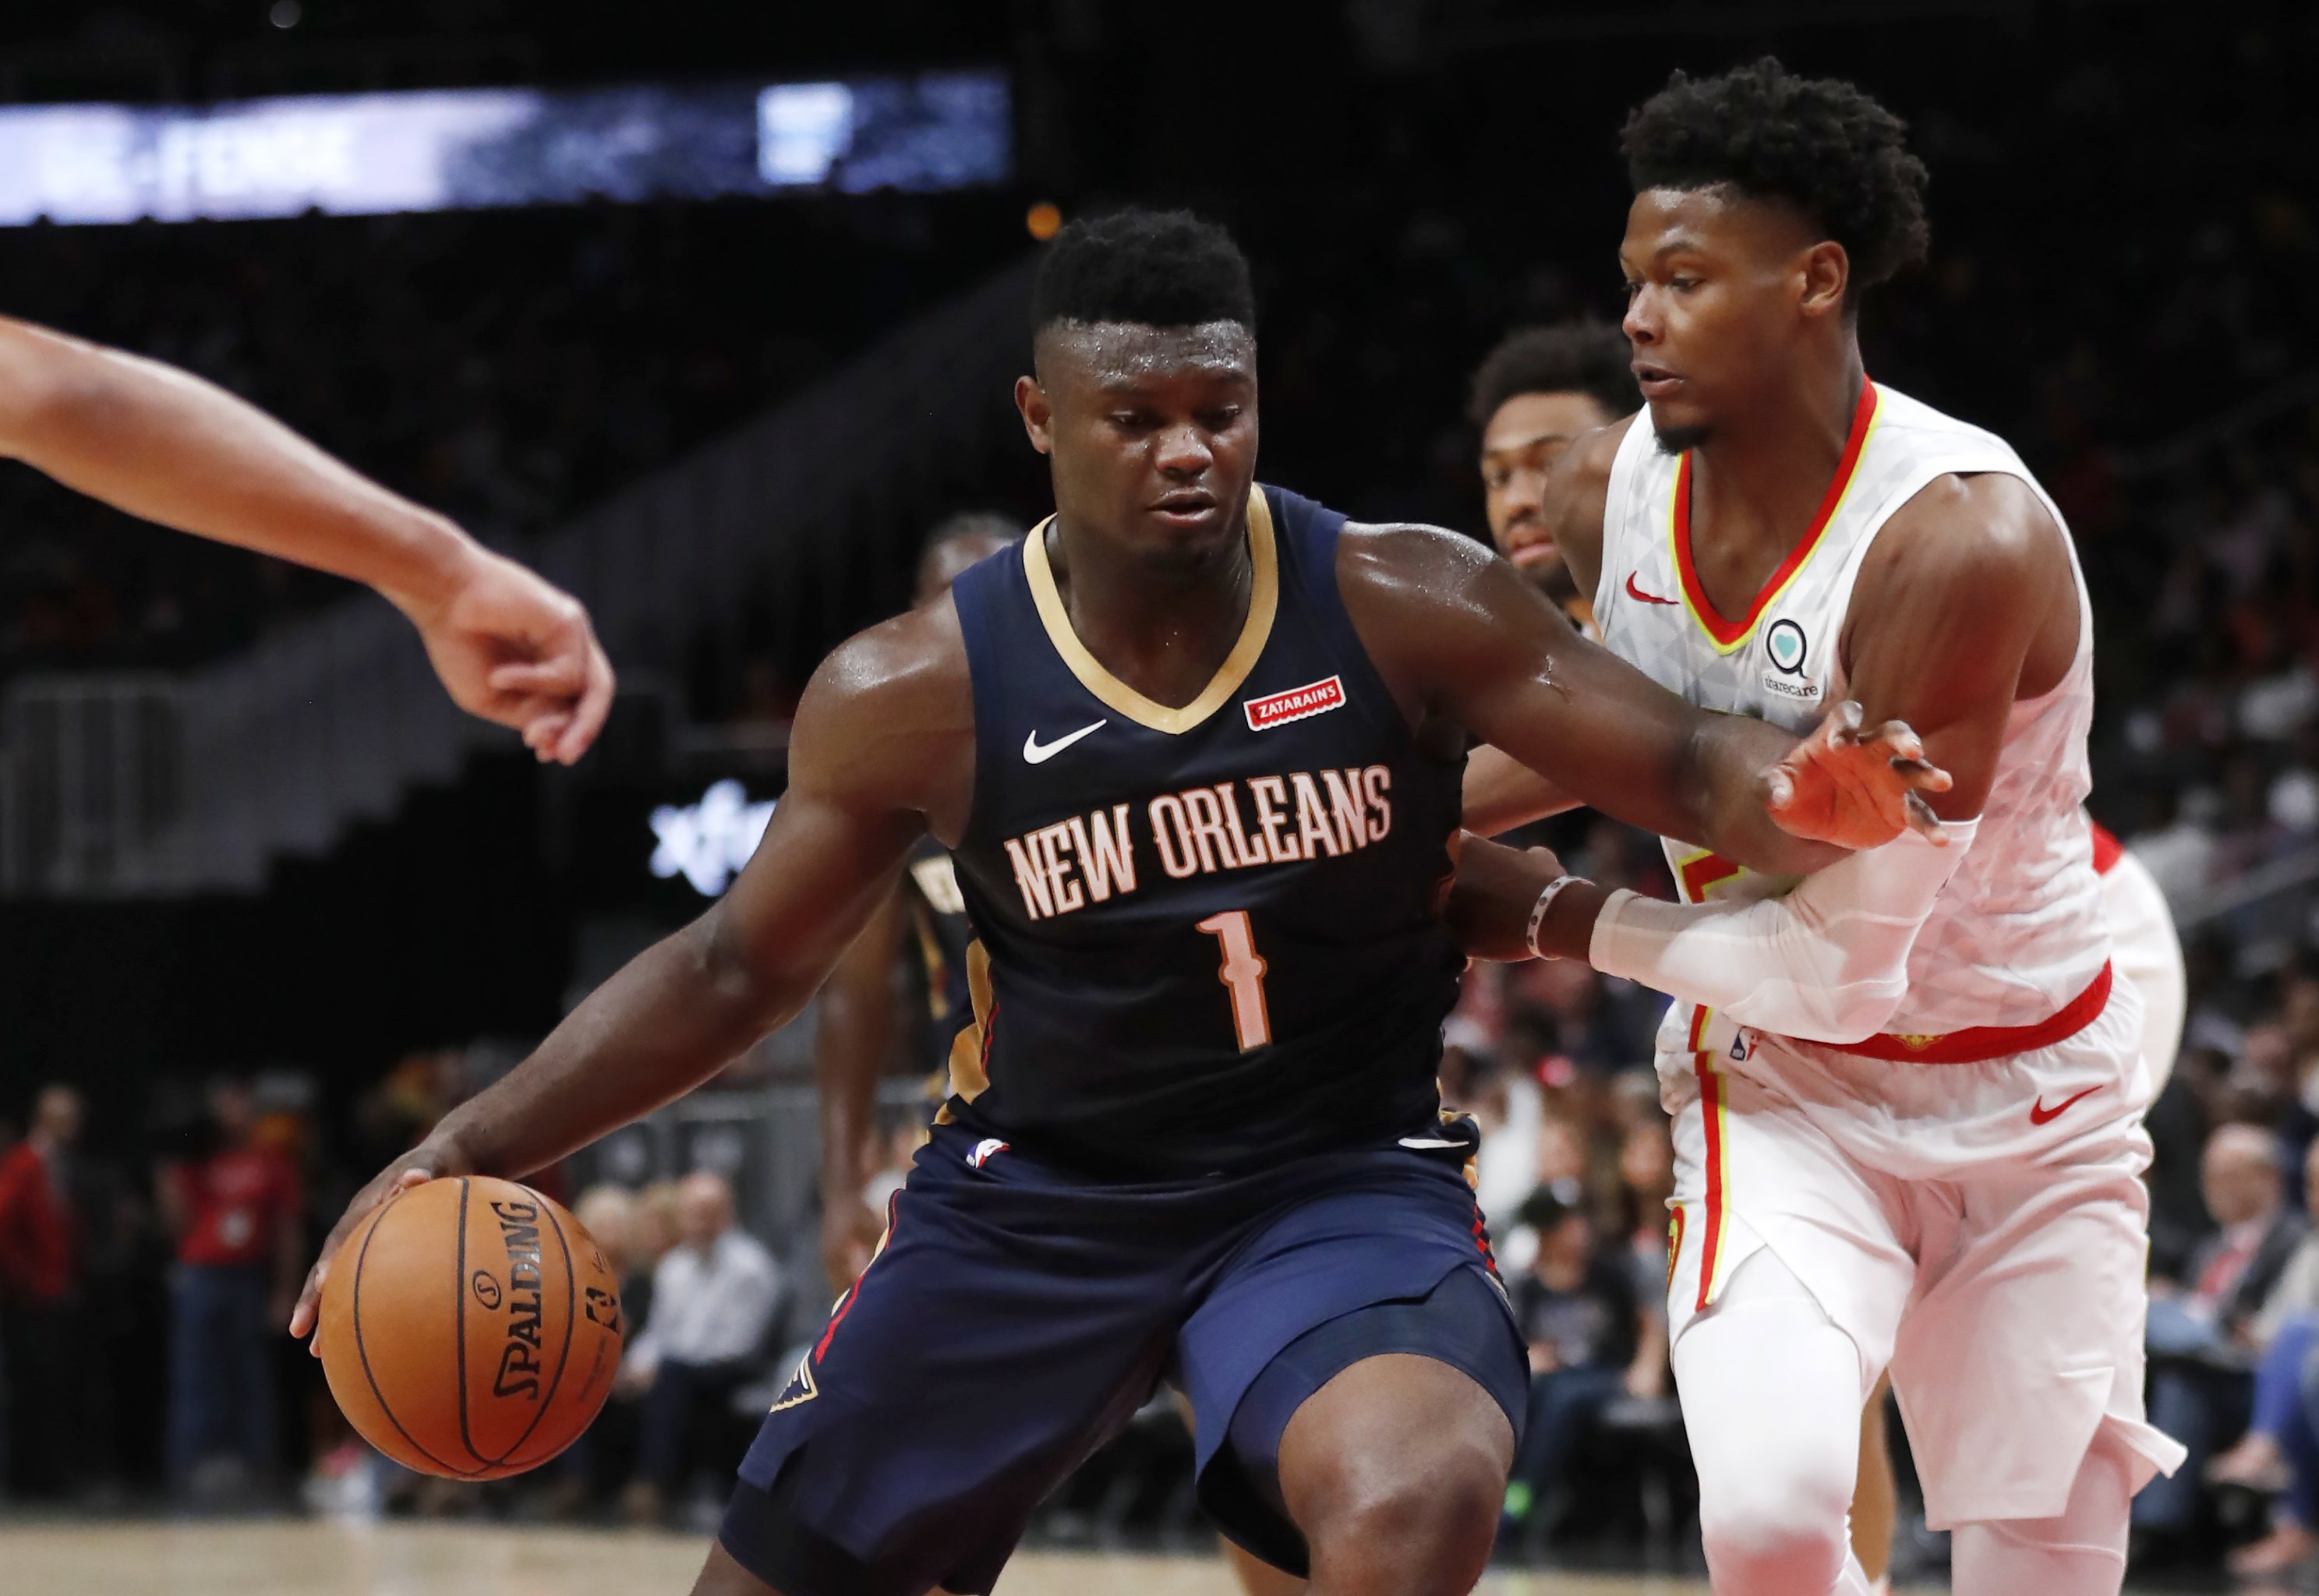 Zion Williamson plans to follow LeBron's blueprint to end injury woes -  Basketball Network - Your daily dose of basketball